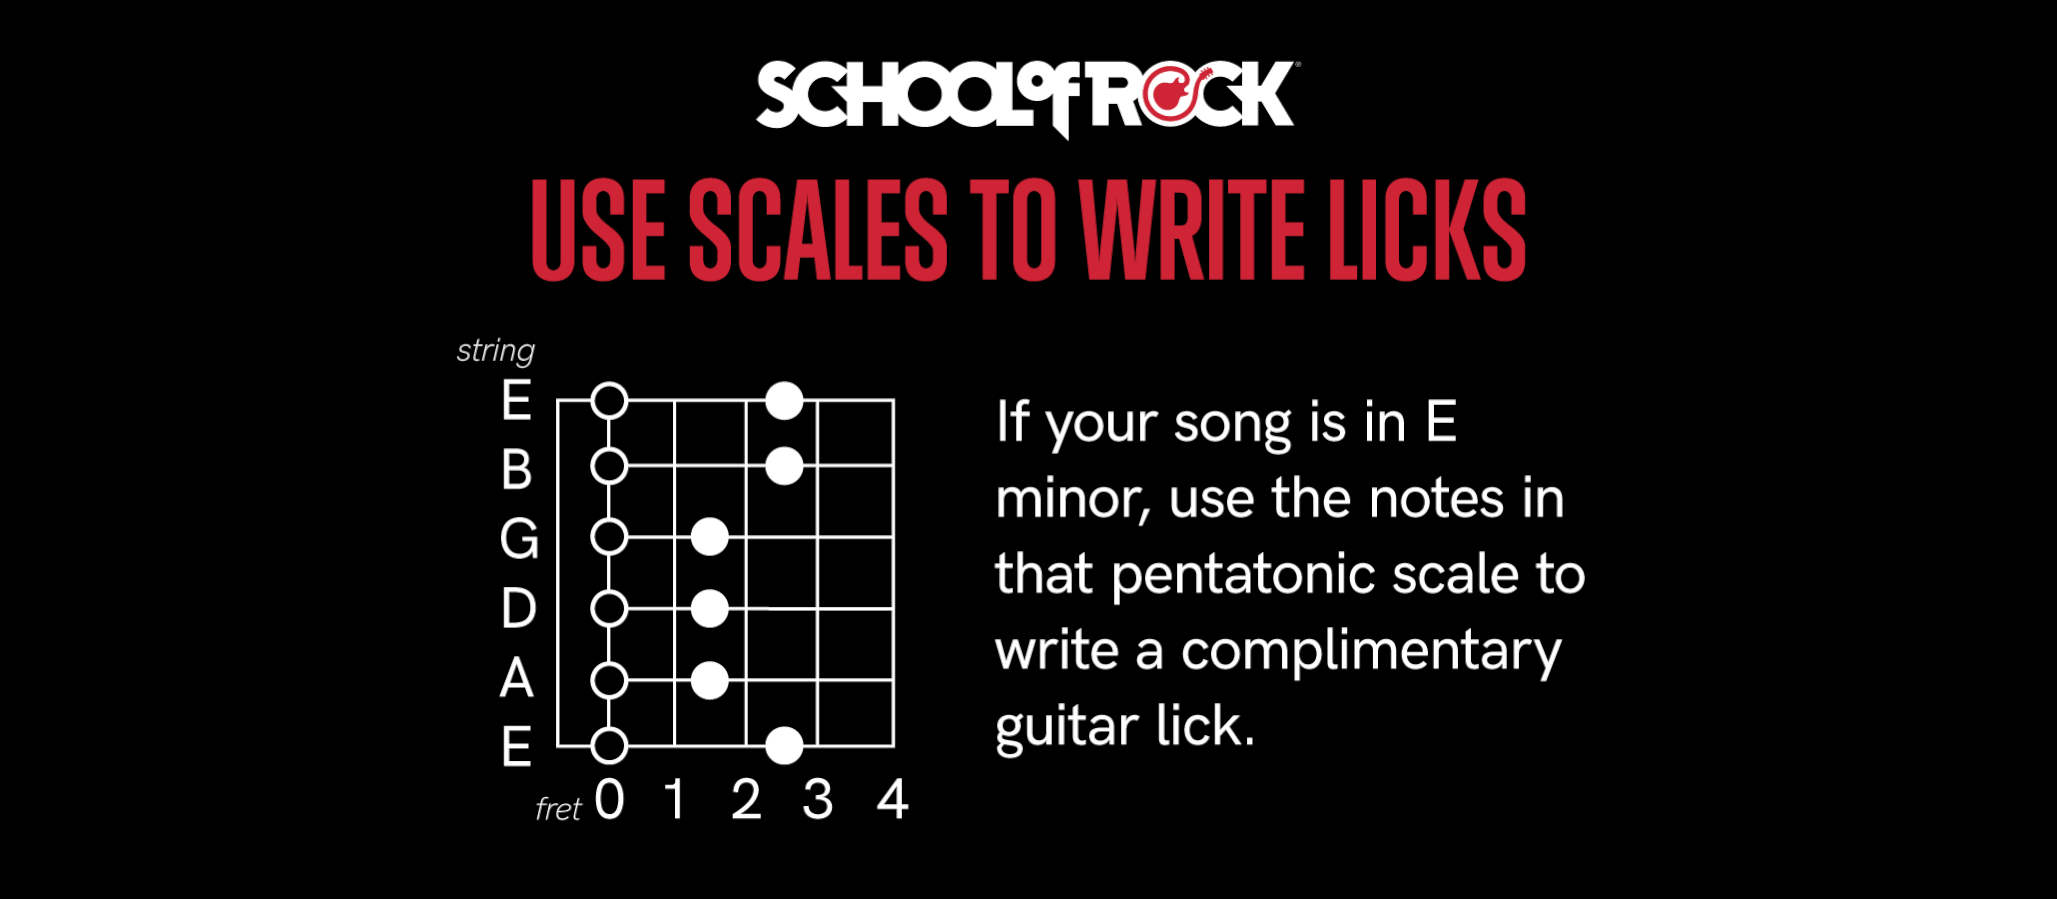 Use scales to write licks